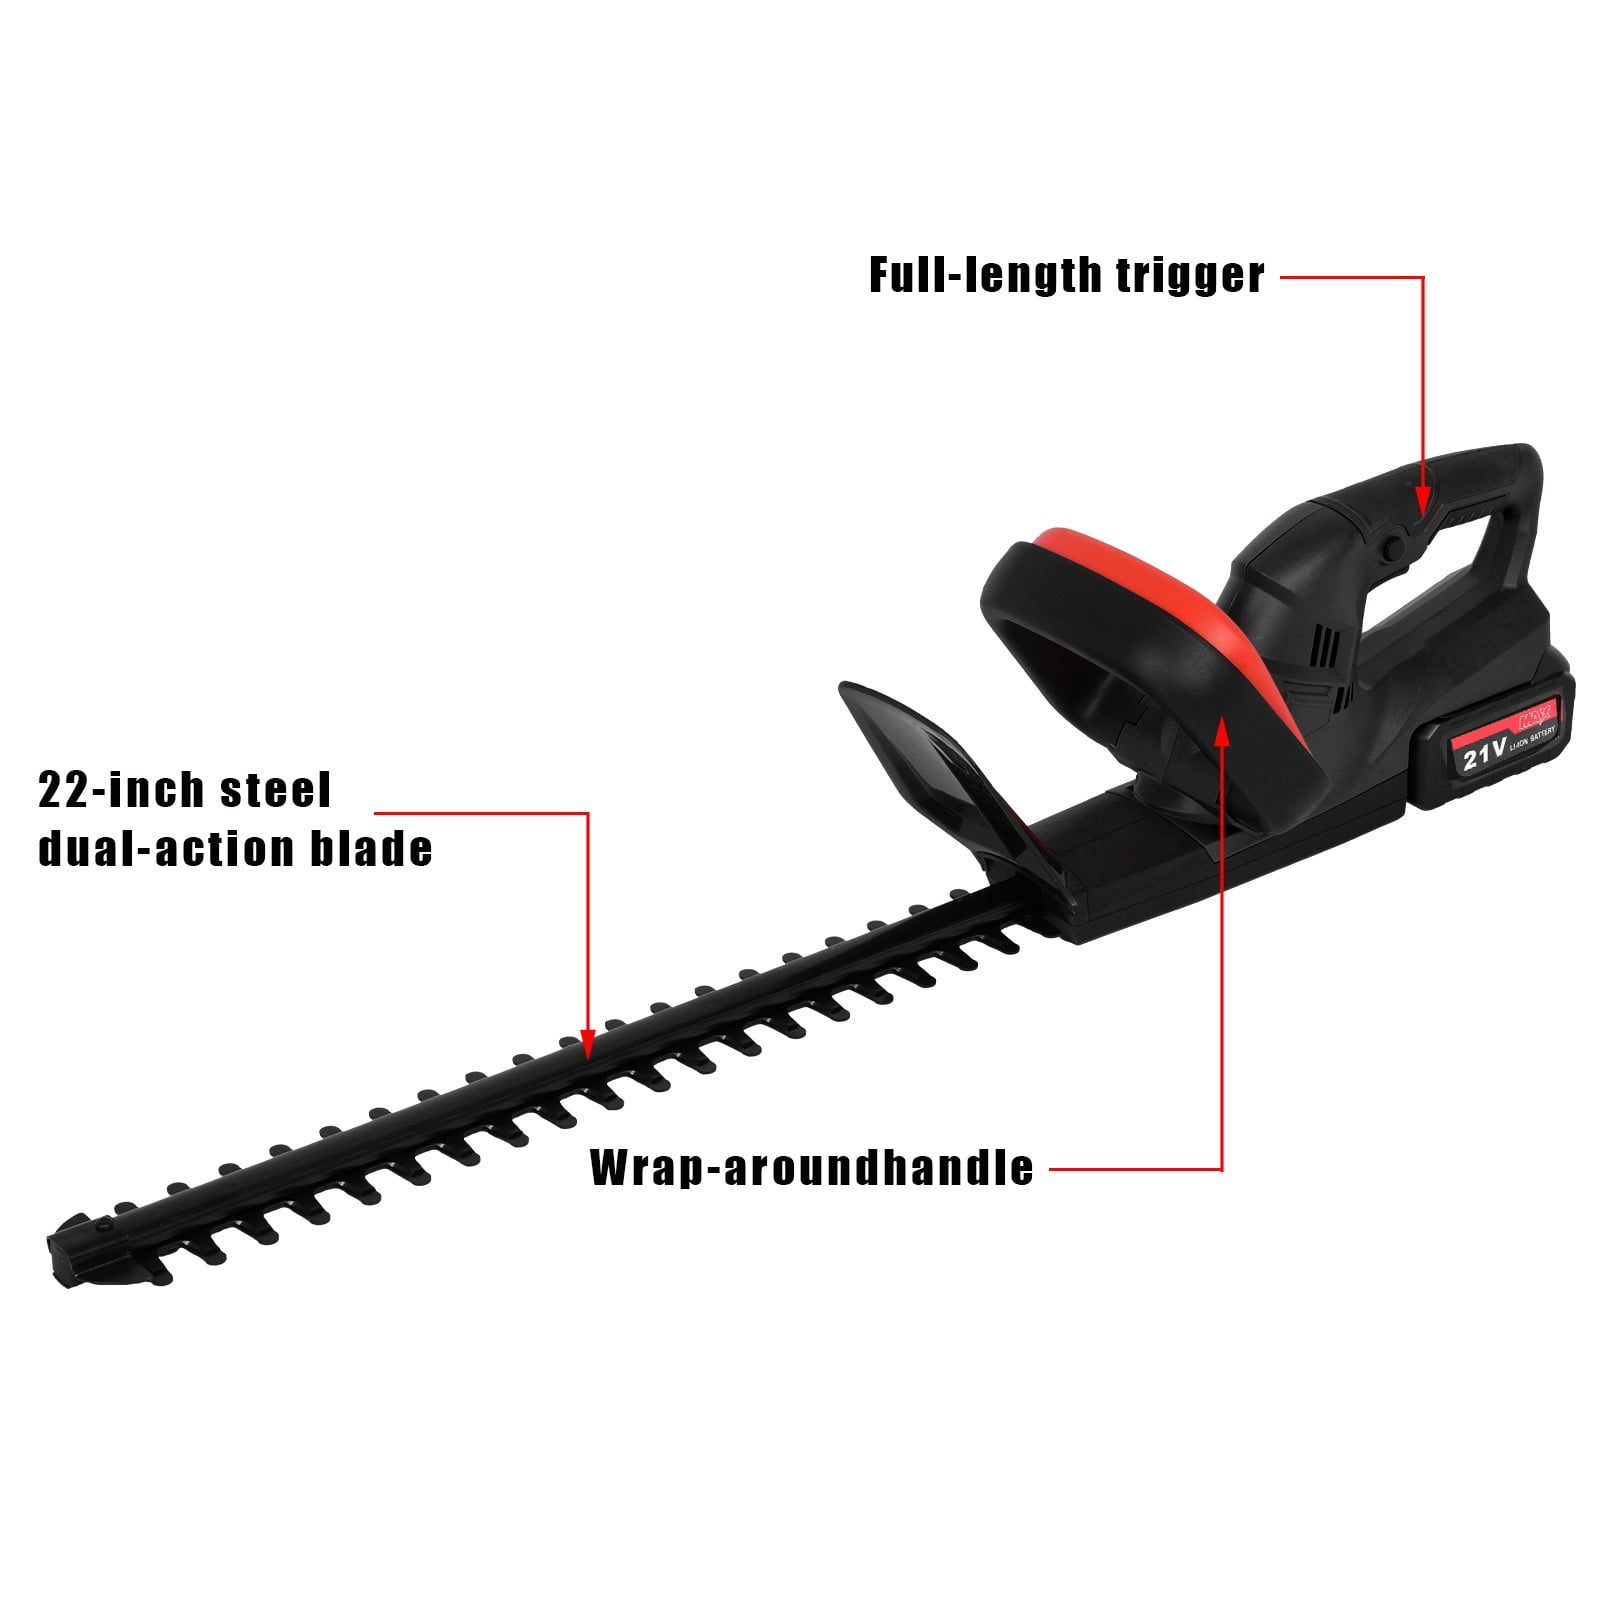 KIMO 20V Cordless Hedge Trimmer Lightweight Electric Weed Eater Garden Pruner for Hedges/Shrubs/Bushes Trimming 20-Inch Dual-Action Blade 3/5 Cutting Capacity 1400 RPM 2.0Ah Battery&Fast Charger 